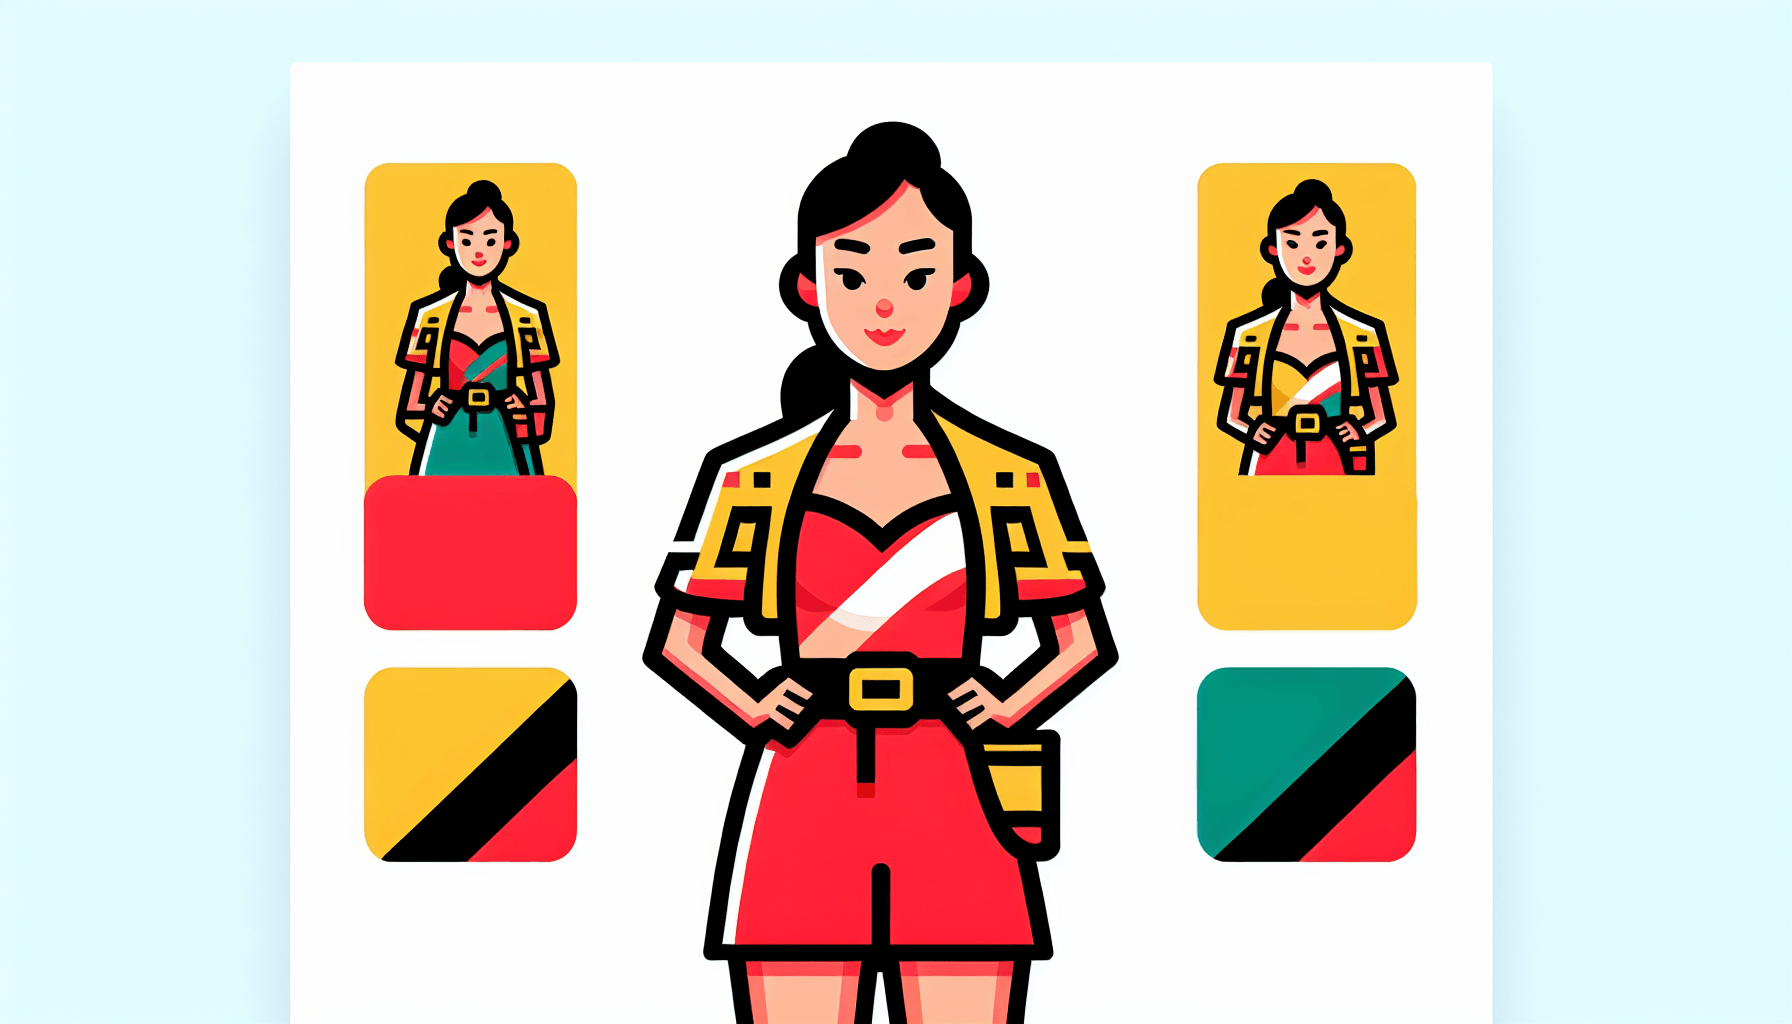 Lifeguard in flat illustration style and white background, red #f47574, green #88c7a8, yellow #fcc44b, and blue #645bc8 colors.